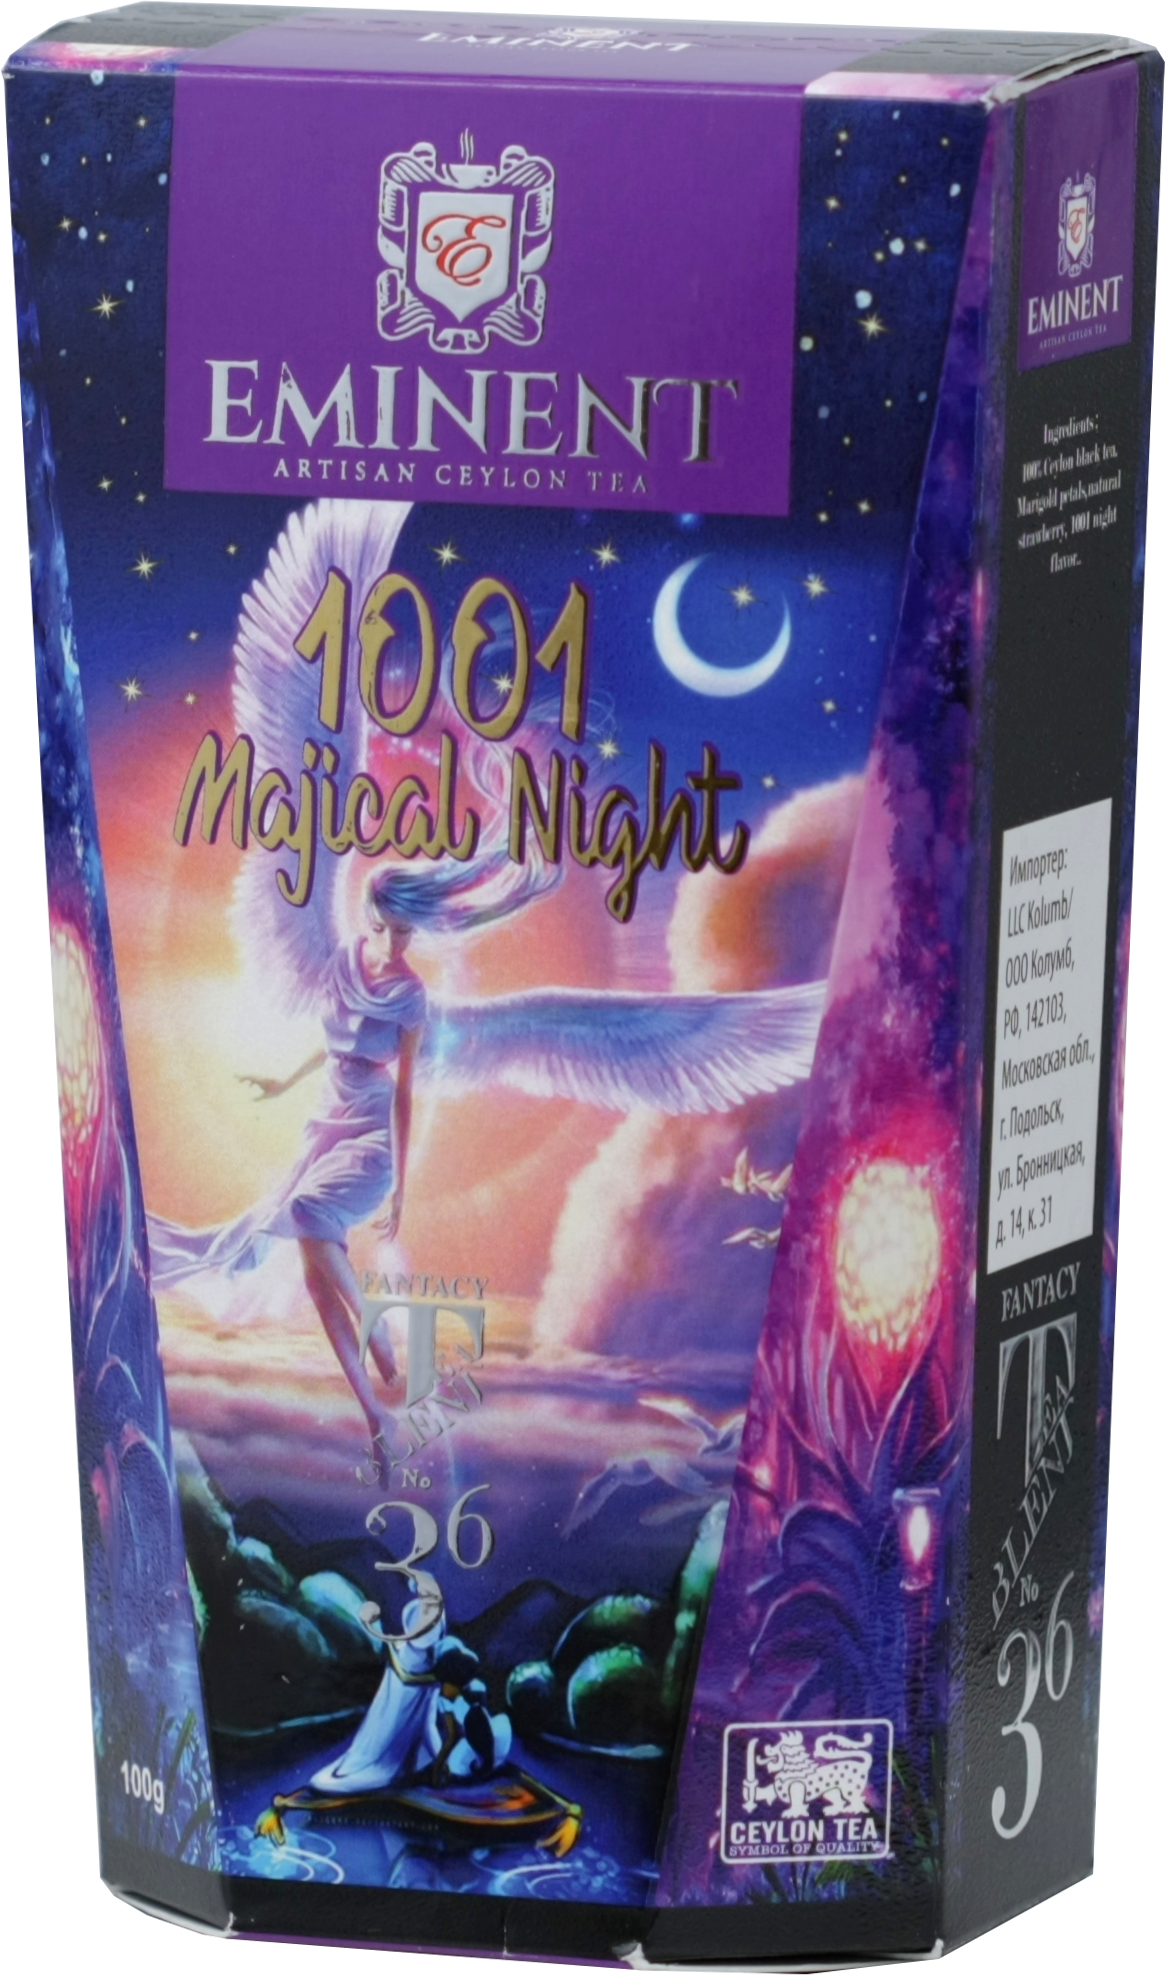 Eminent. 1001 Magical night 100 гр. карт.пачка